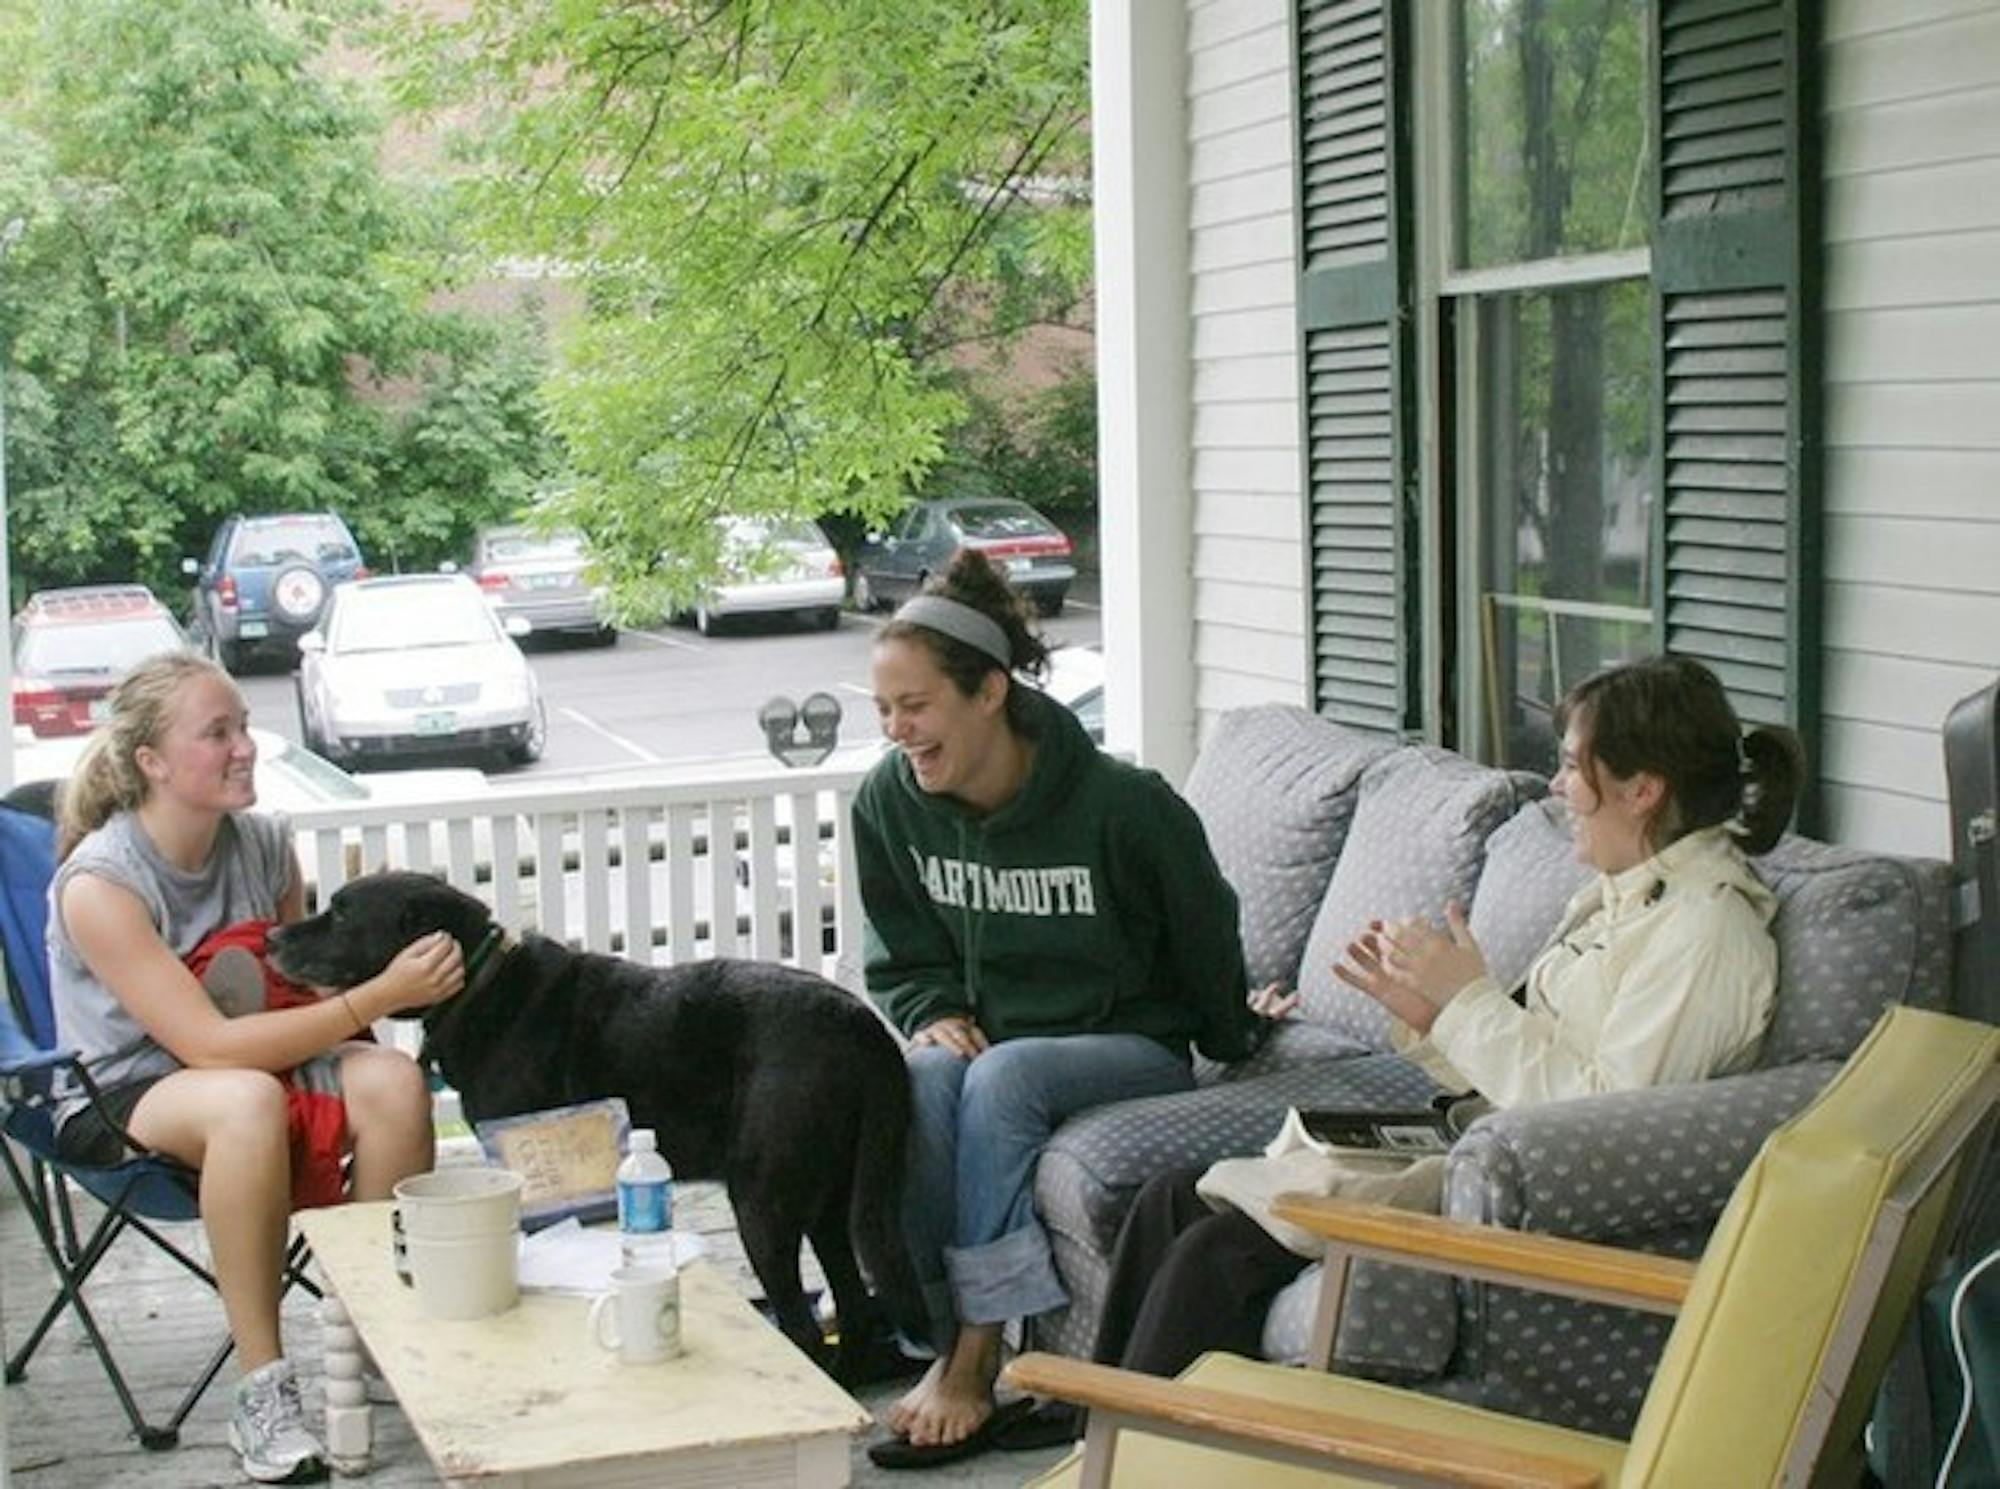 From left, Kate Labrum '08, house dog Sam, Haley Morris '08, and Alyson Guillet '08 relax on the porch of their off-campus house at 8 School Street.